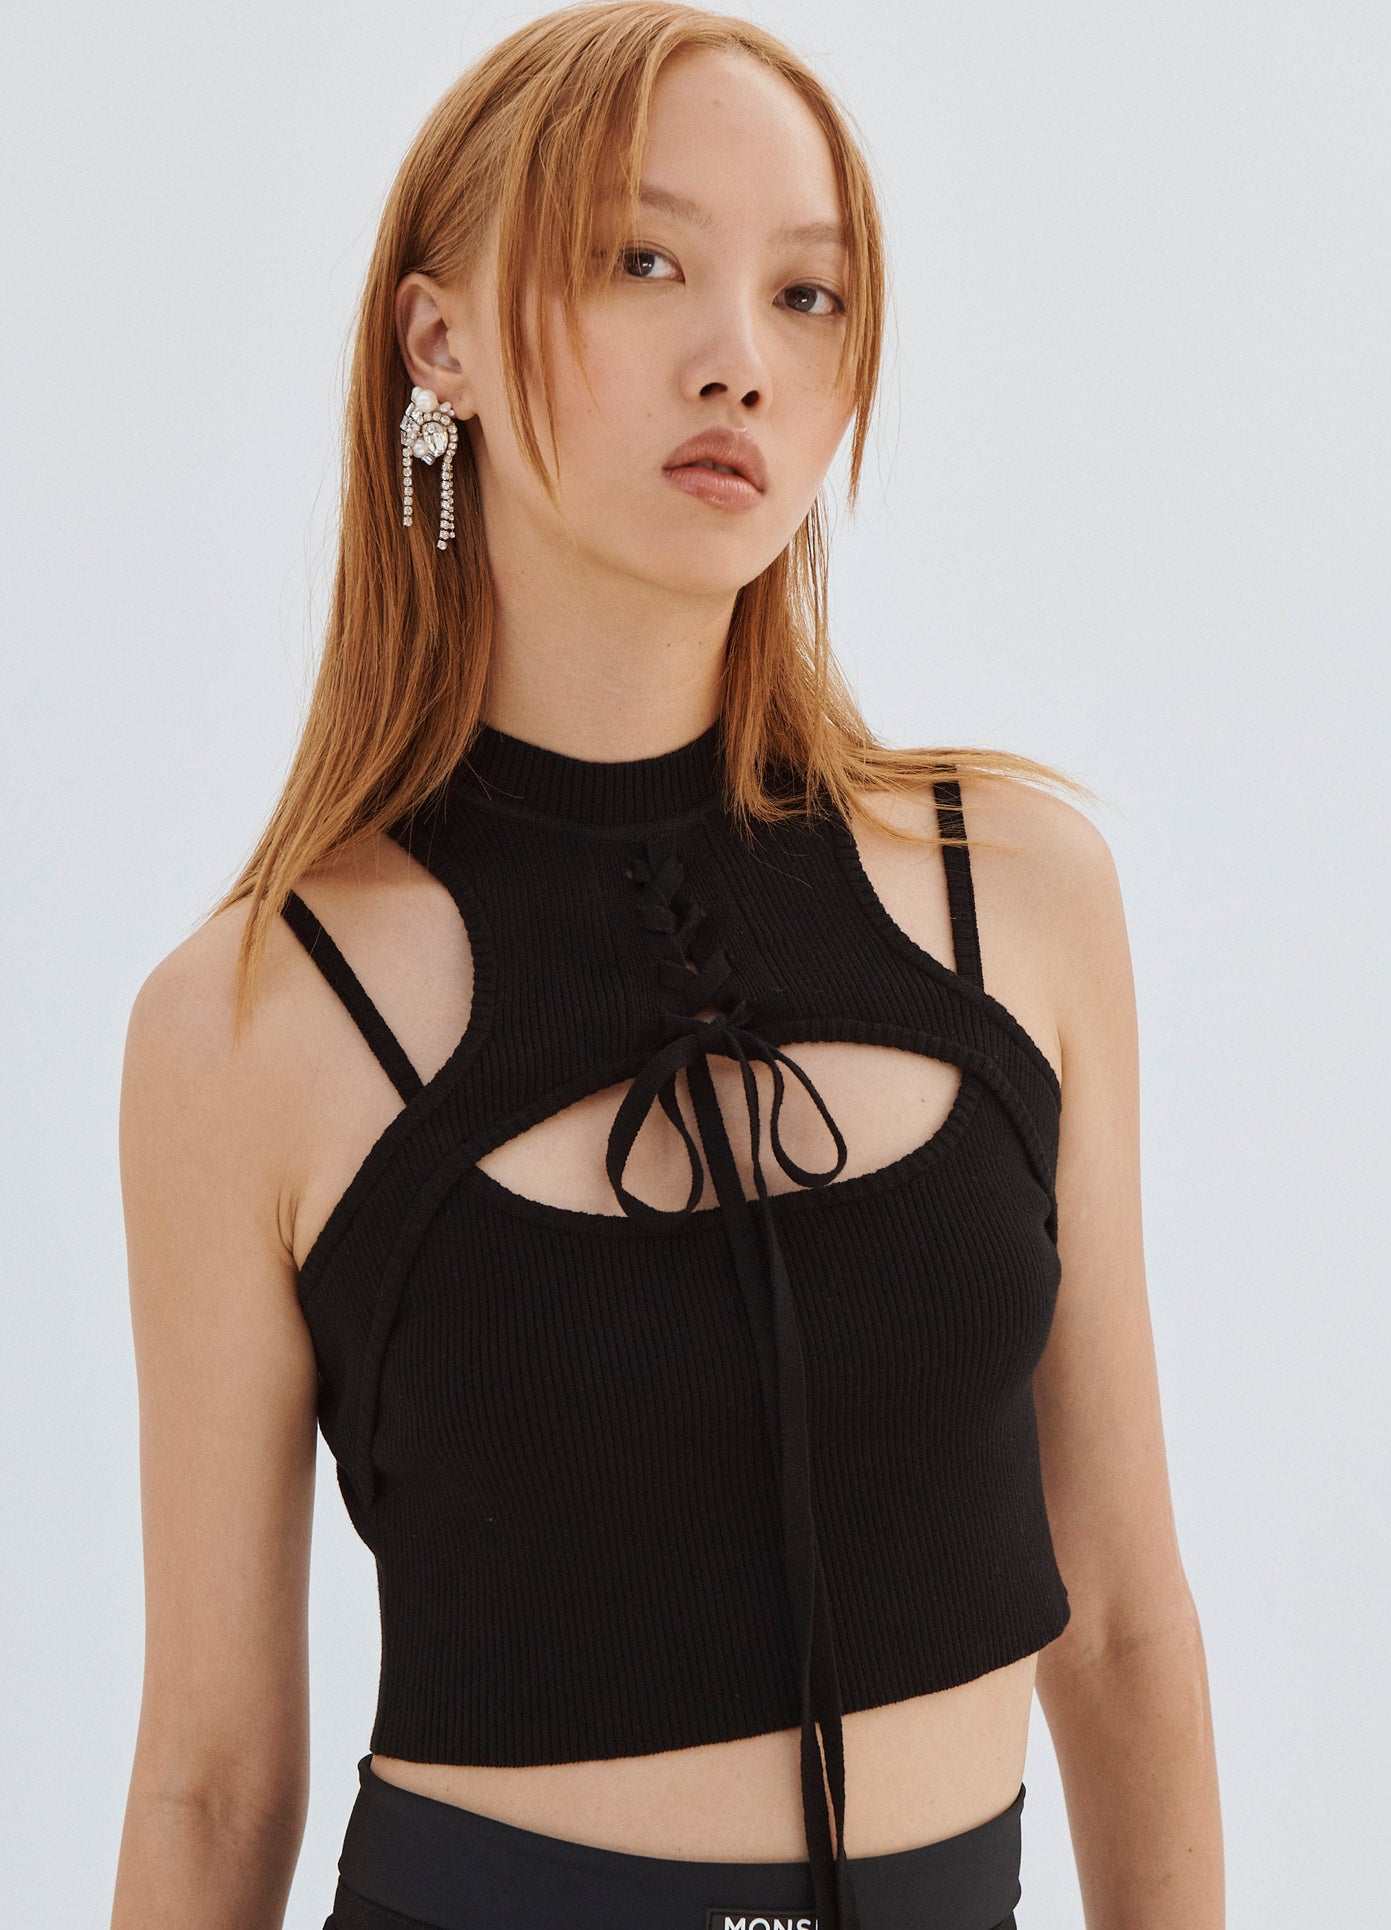 MONSE Halter Neck Knit Top in Black on Model Front View